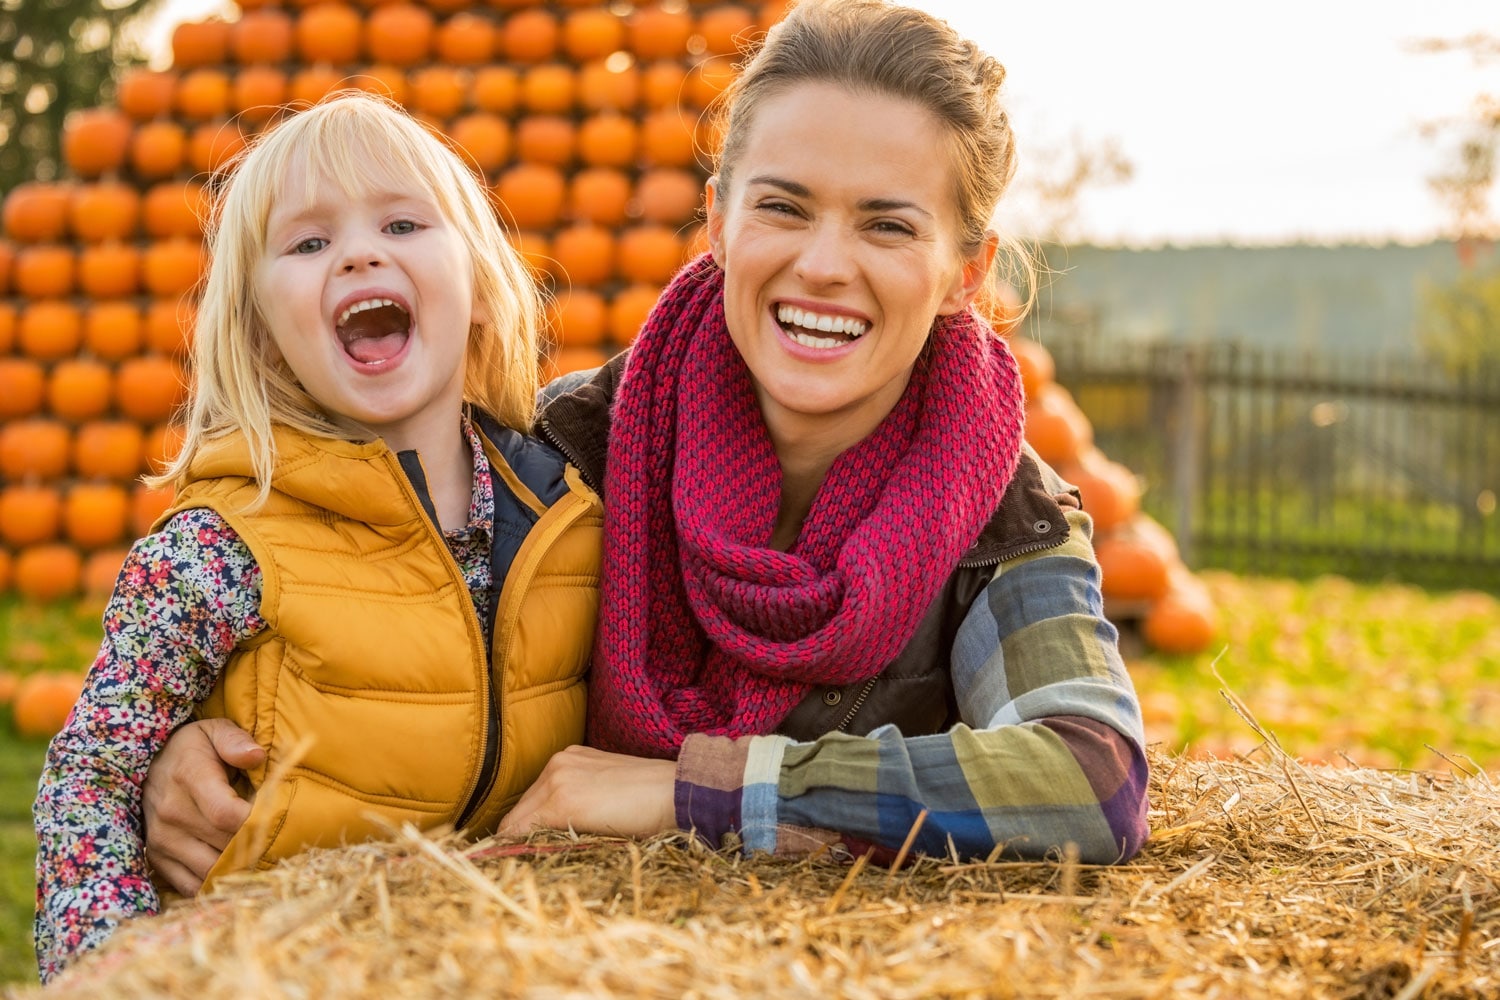 How to Keep Your Child's Teeth Healthy During the Holidays